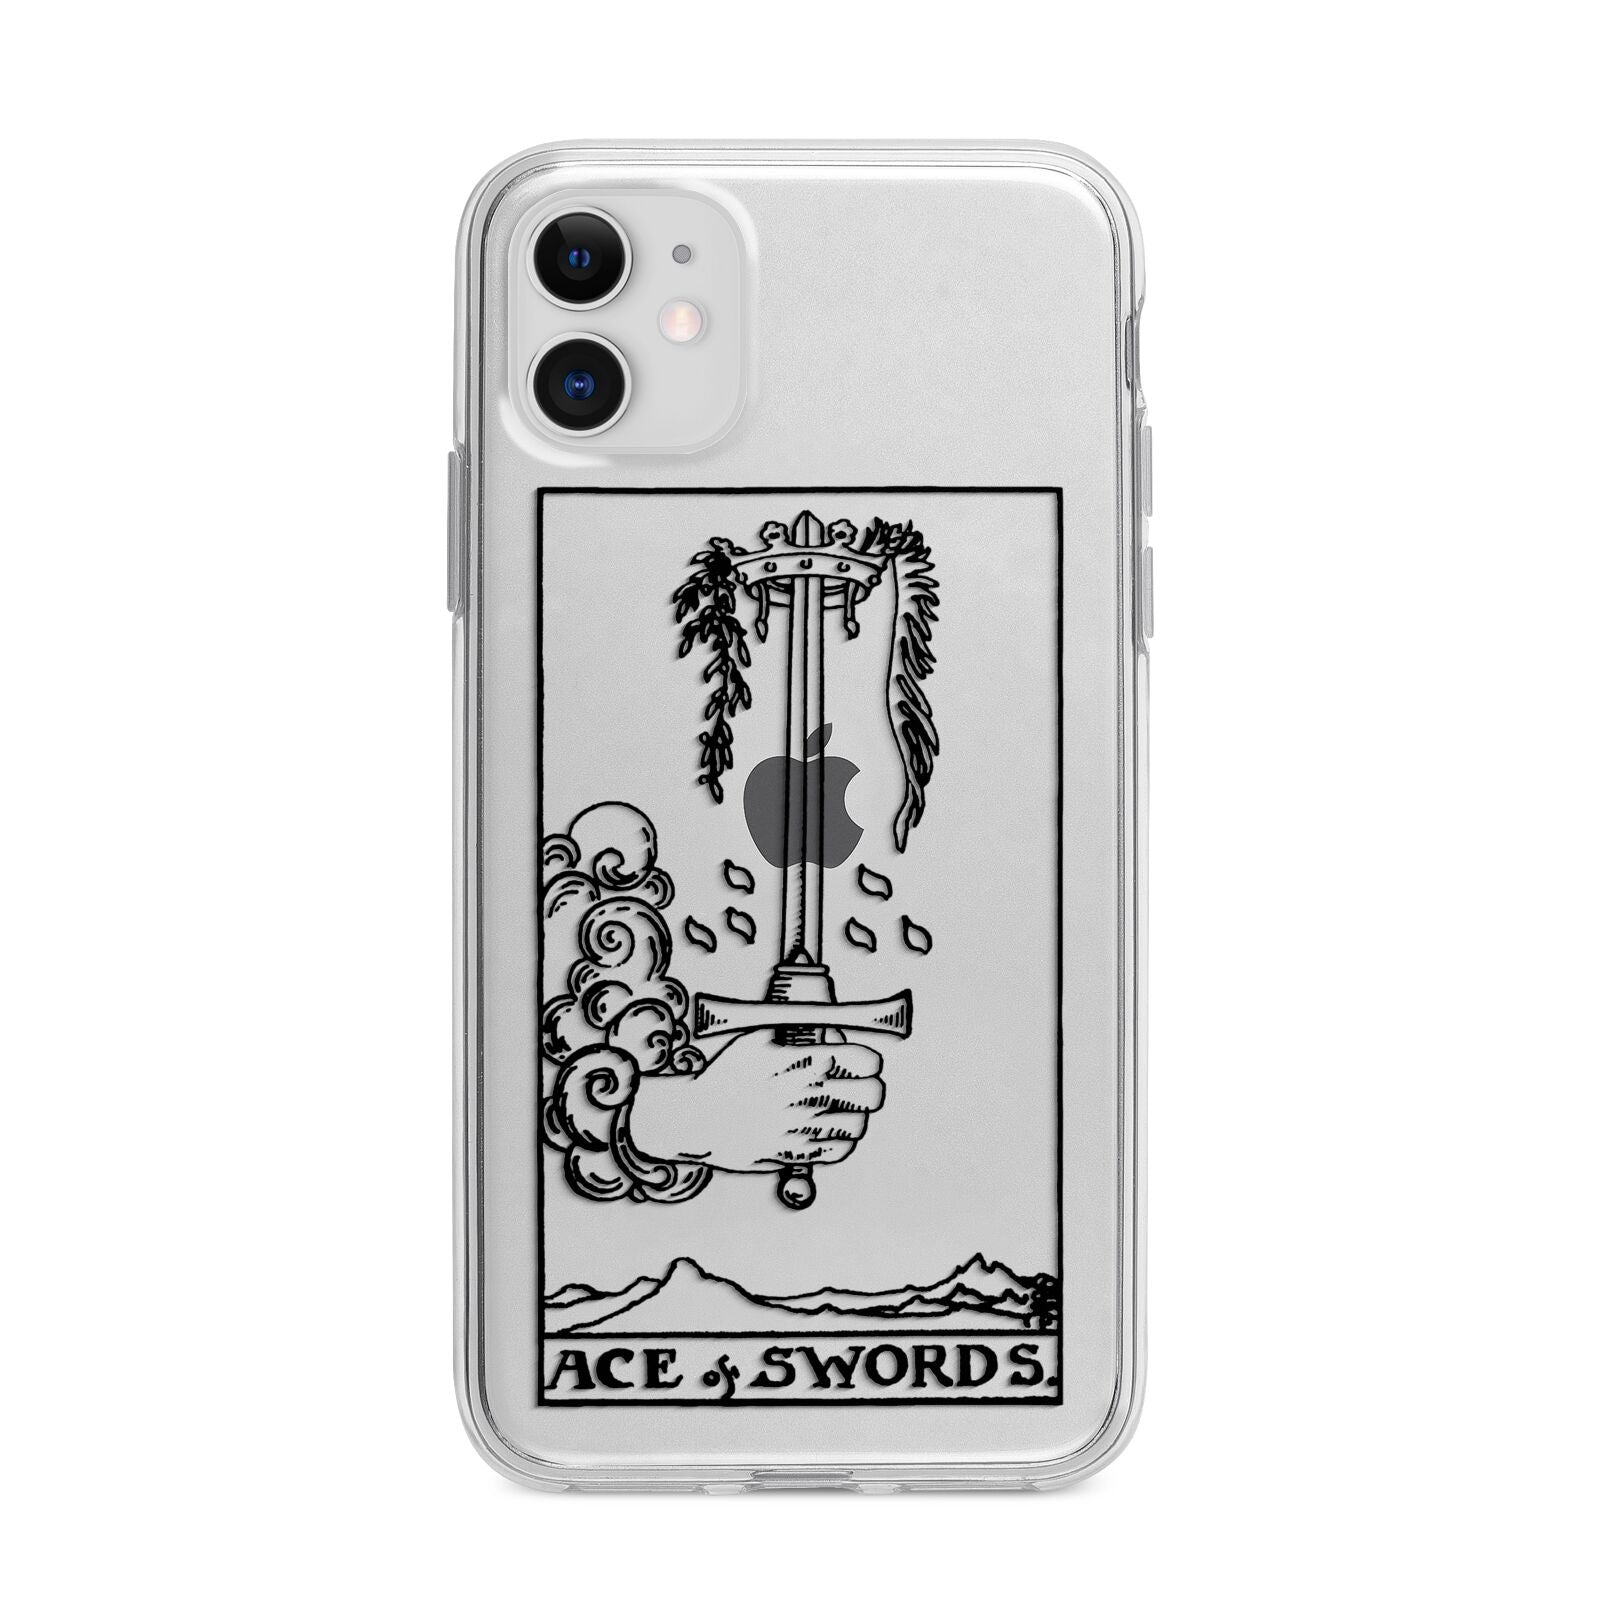 Ace of Swords Monochrome Apple iPhone 11 in White with Bumper Case